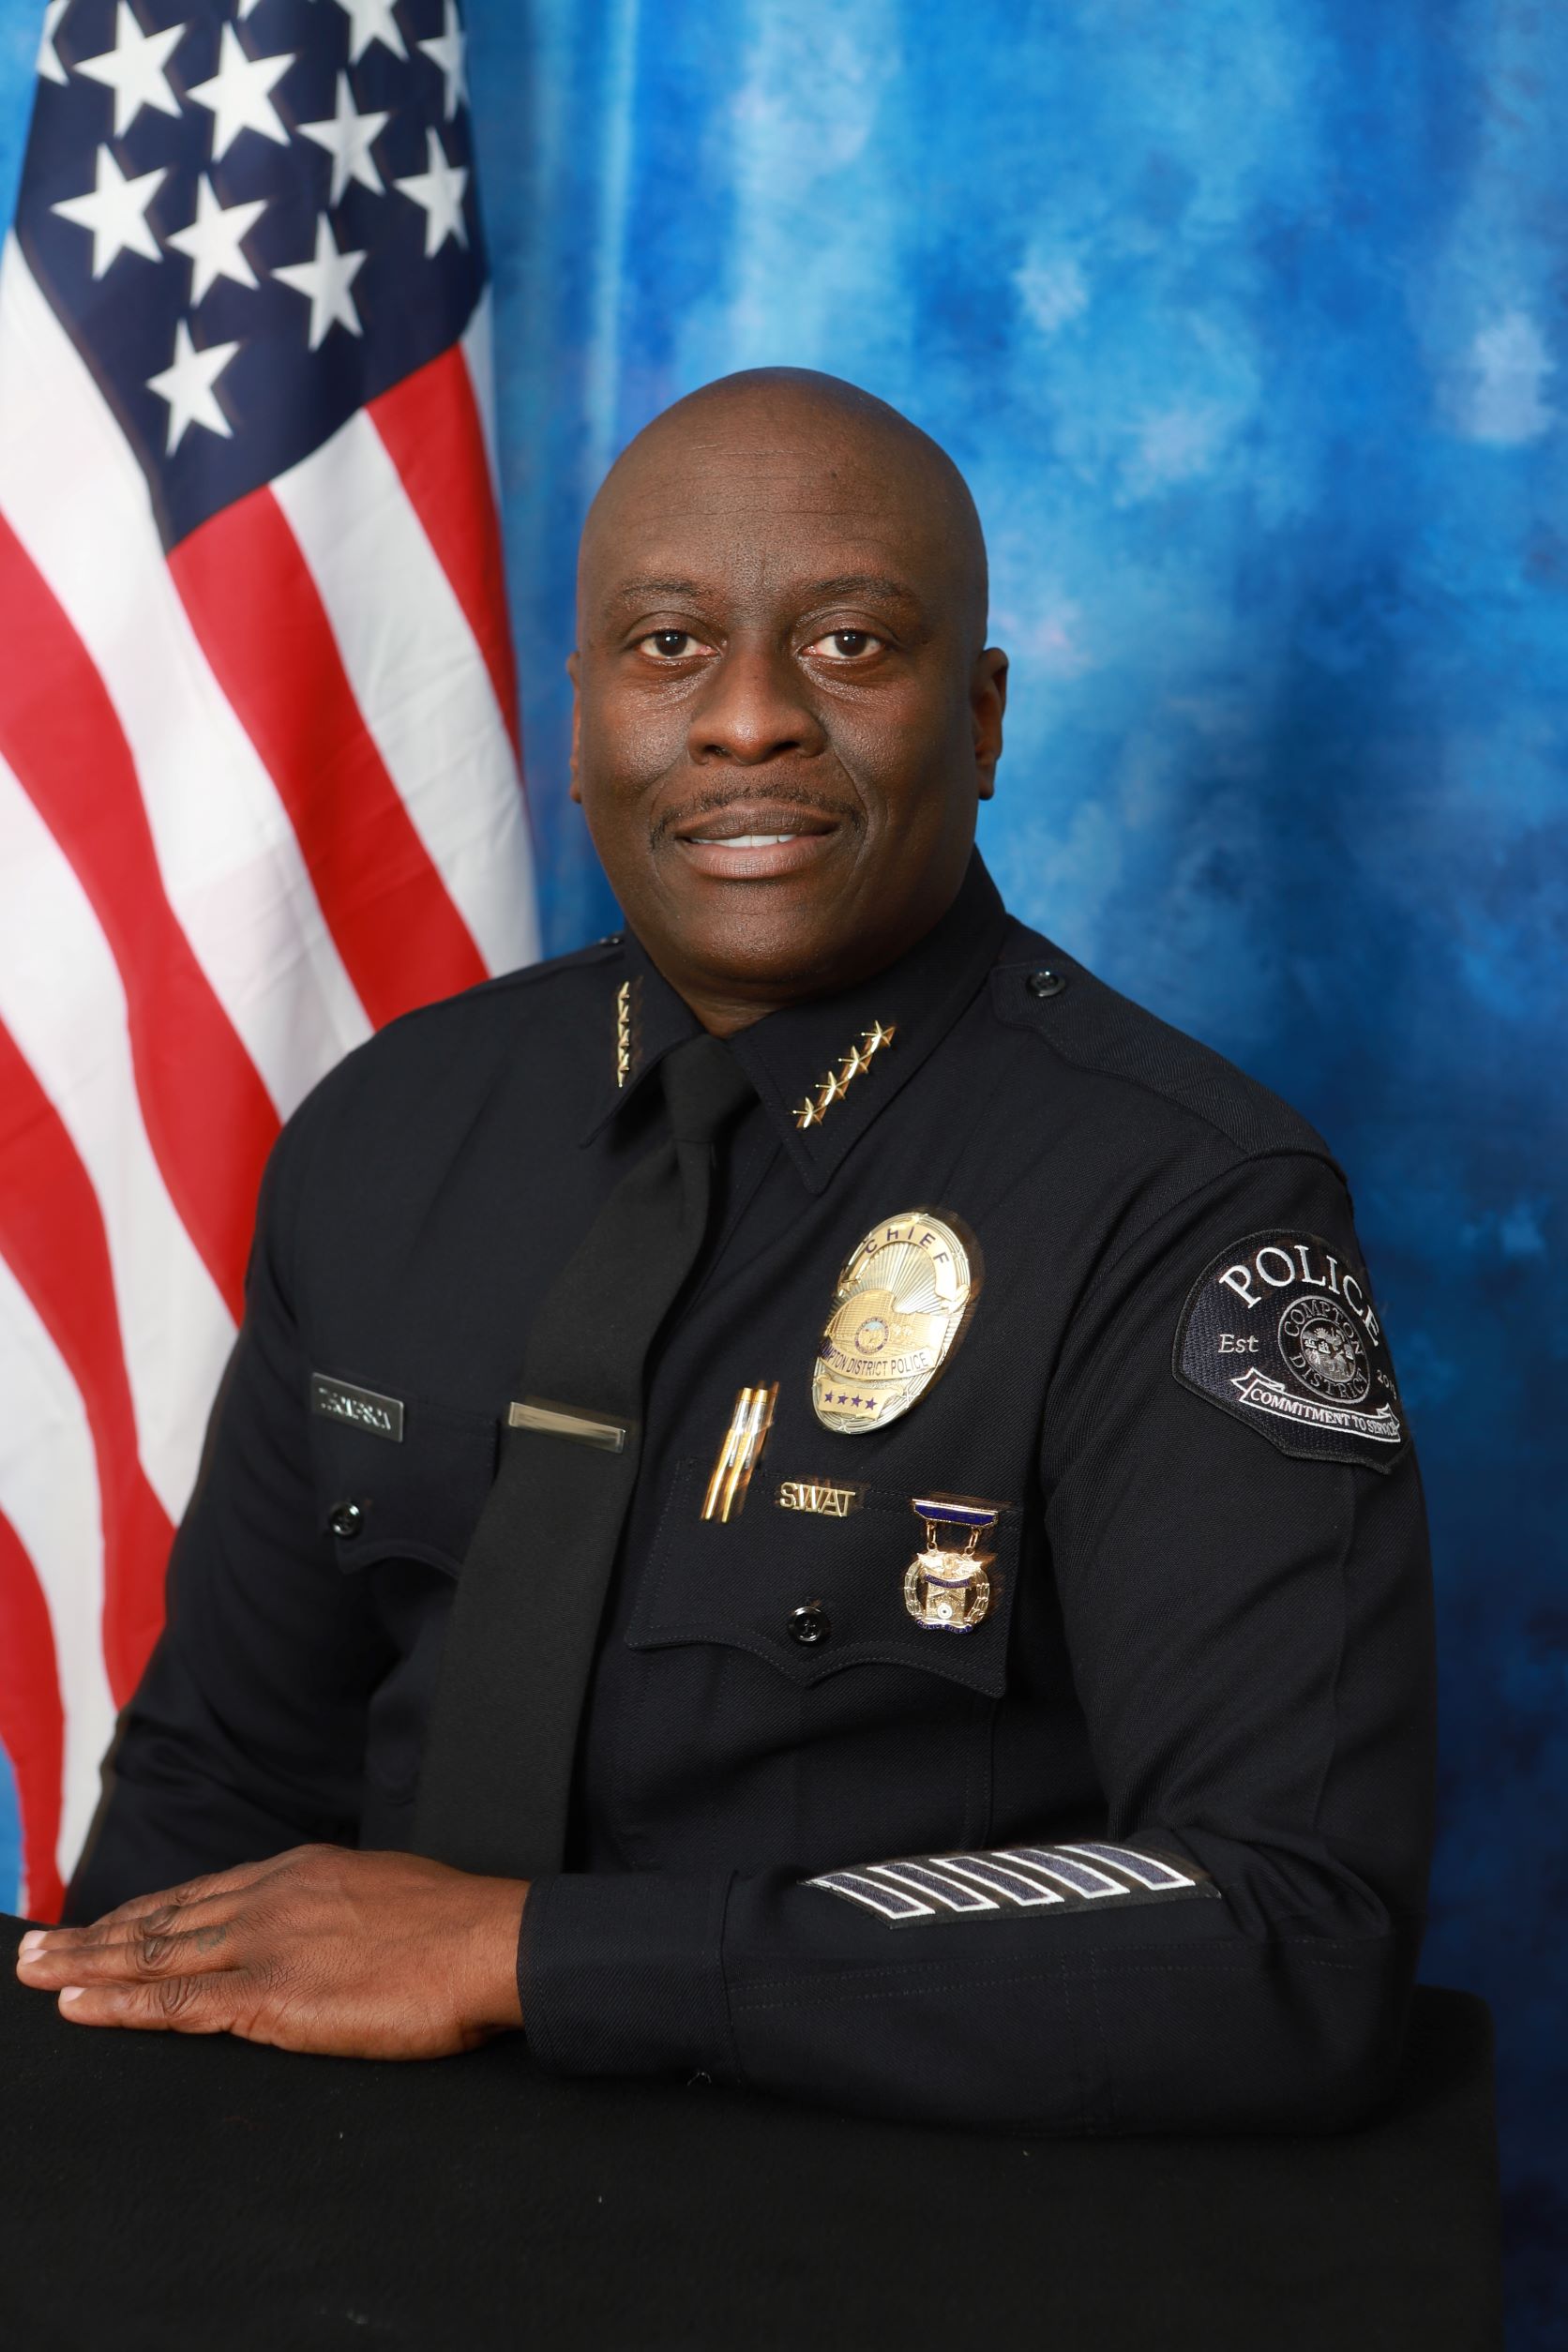 Portrait of Chief Thompson, blue background, American flag on the right